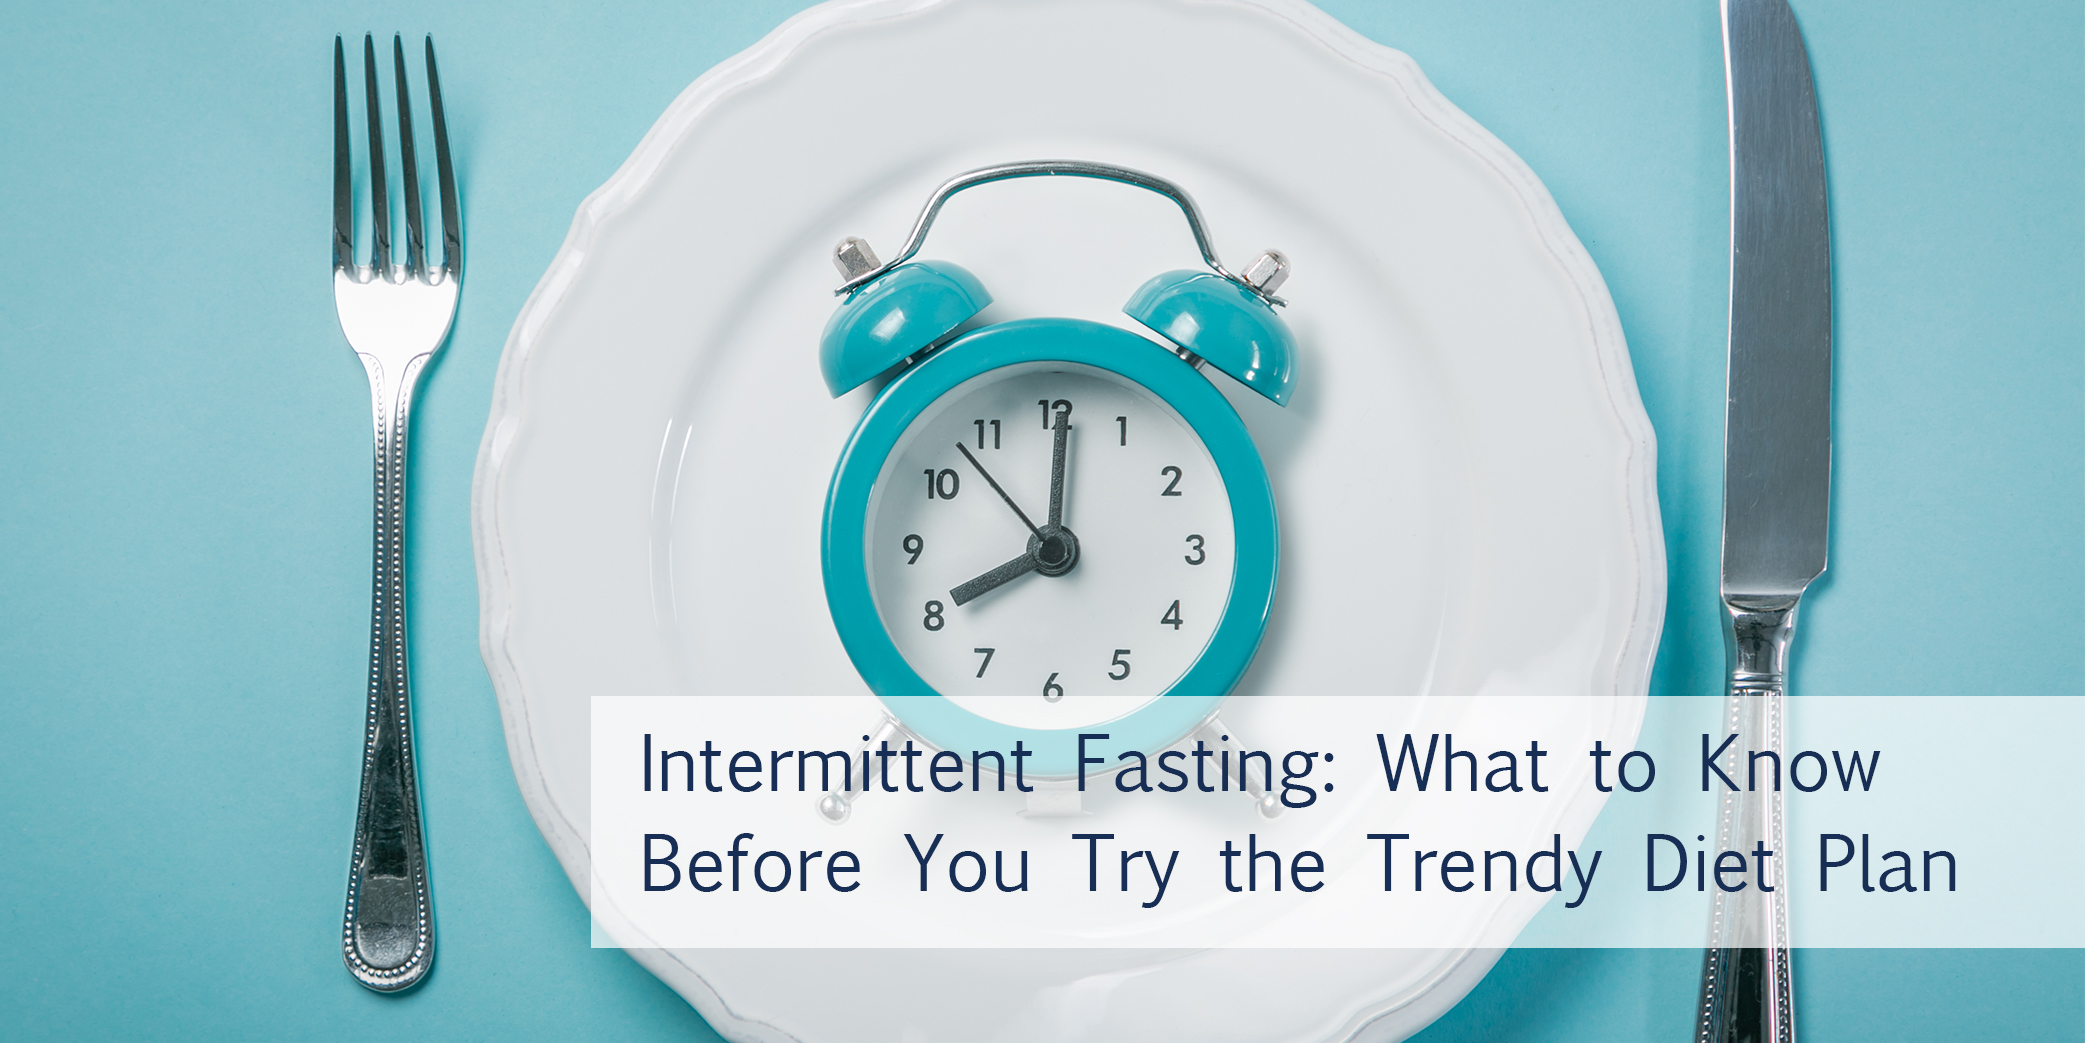 Intermittent fasting: is it a diet fad worthy of trying?